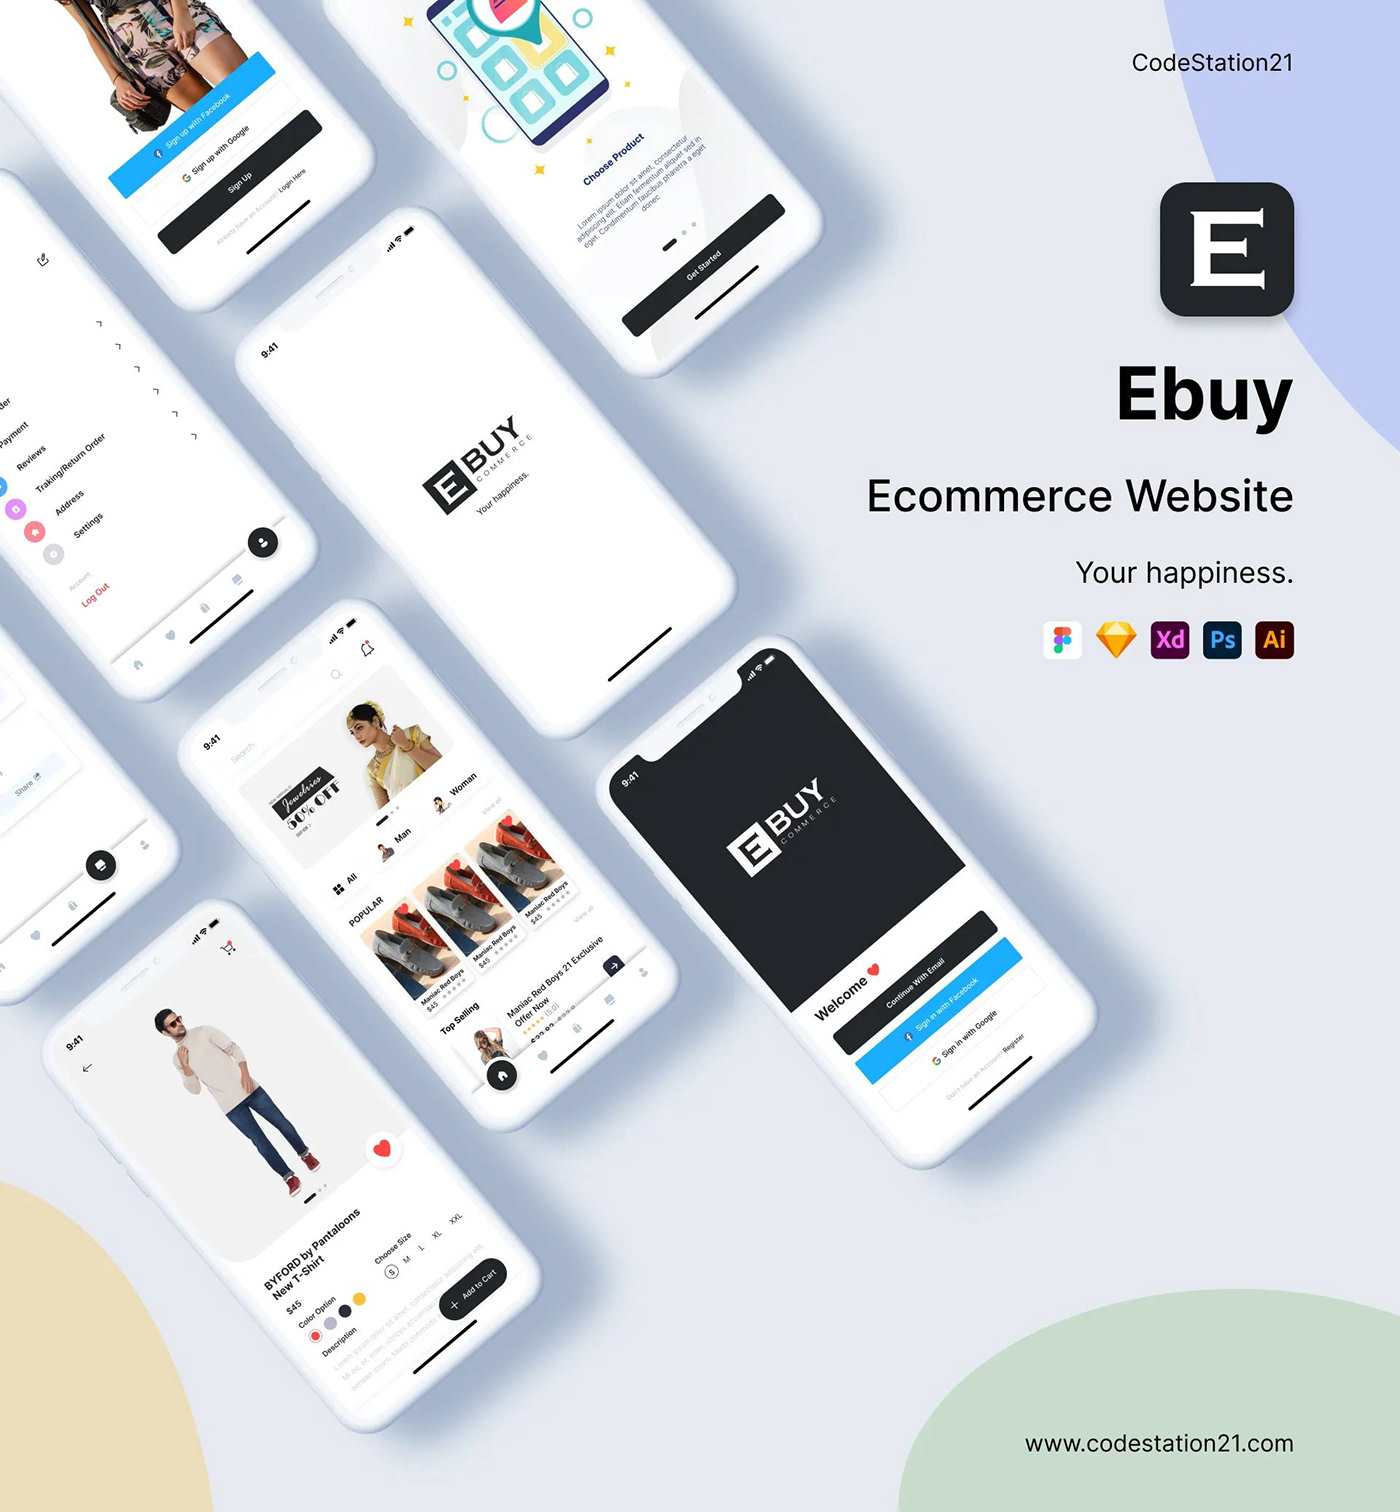 Multivendor e-commerce mobile app user interface (UI/UX) build using Figma for Android and ios.